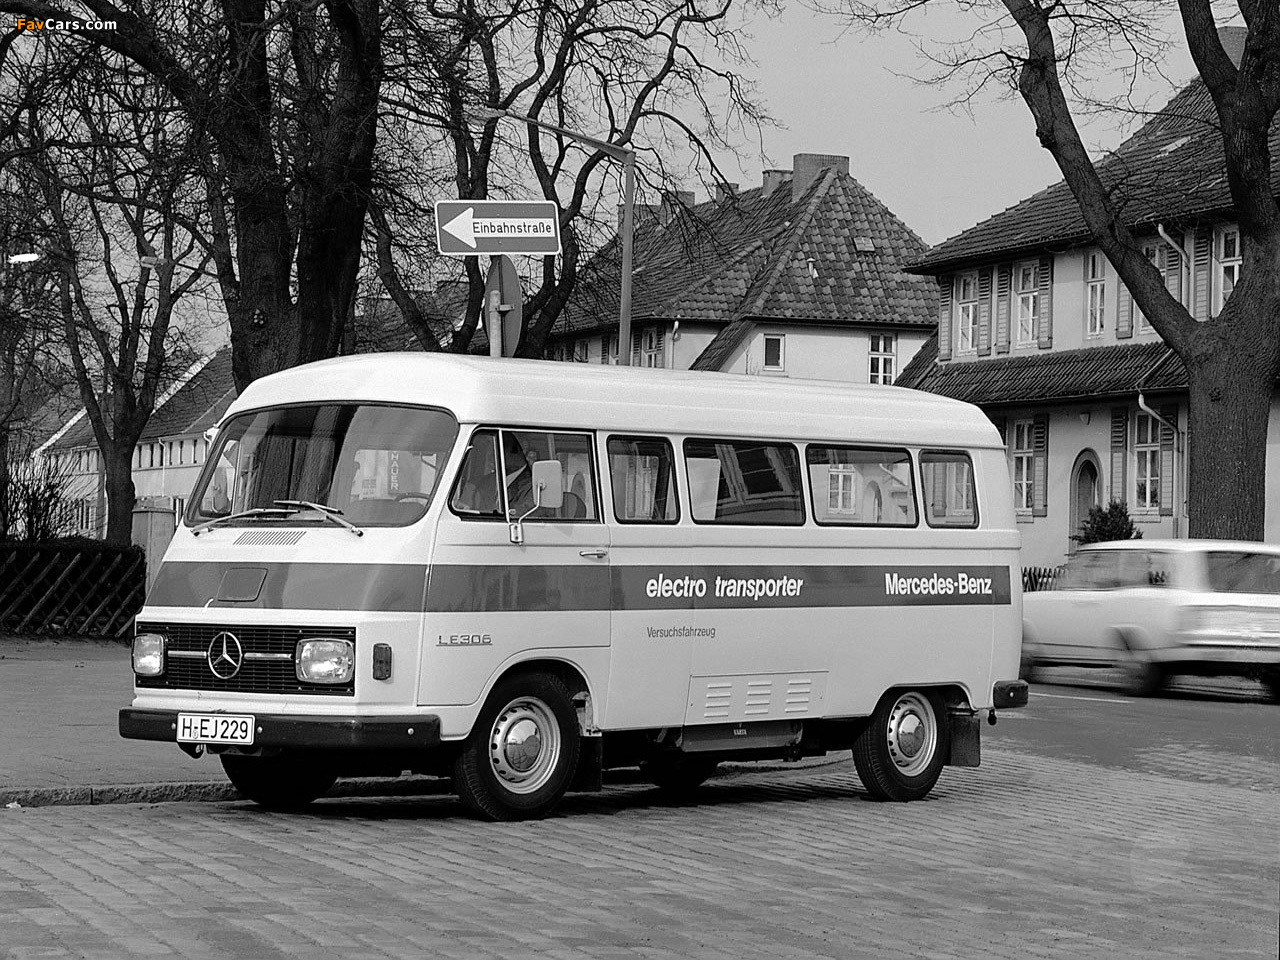 Pictures of Mercedes-Benz LE306 Electro Transporter 1972 (1280 x 960)